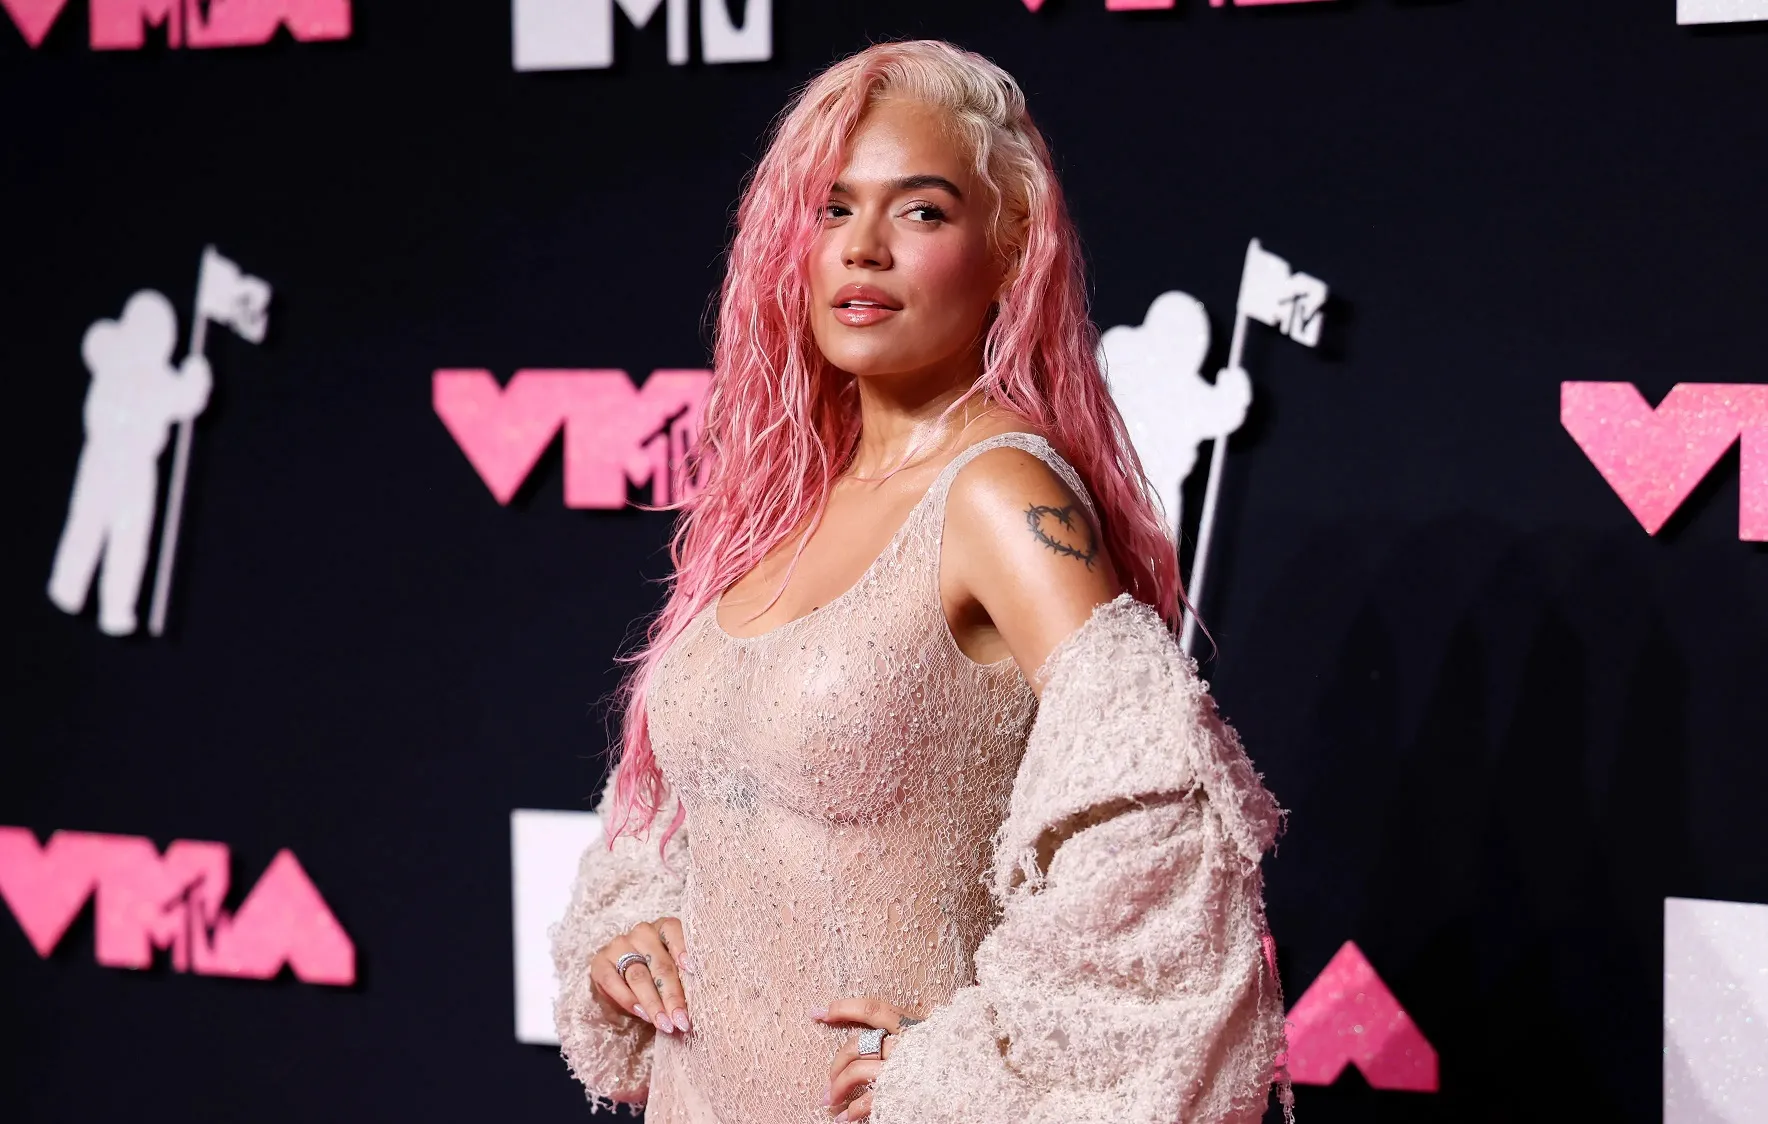 Karol G translucent looks and show drive Anuel AA crazy at the MTV Video Music Awards 2023